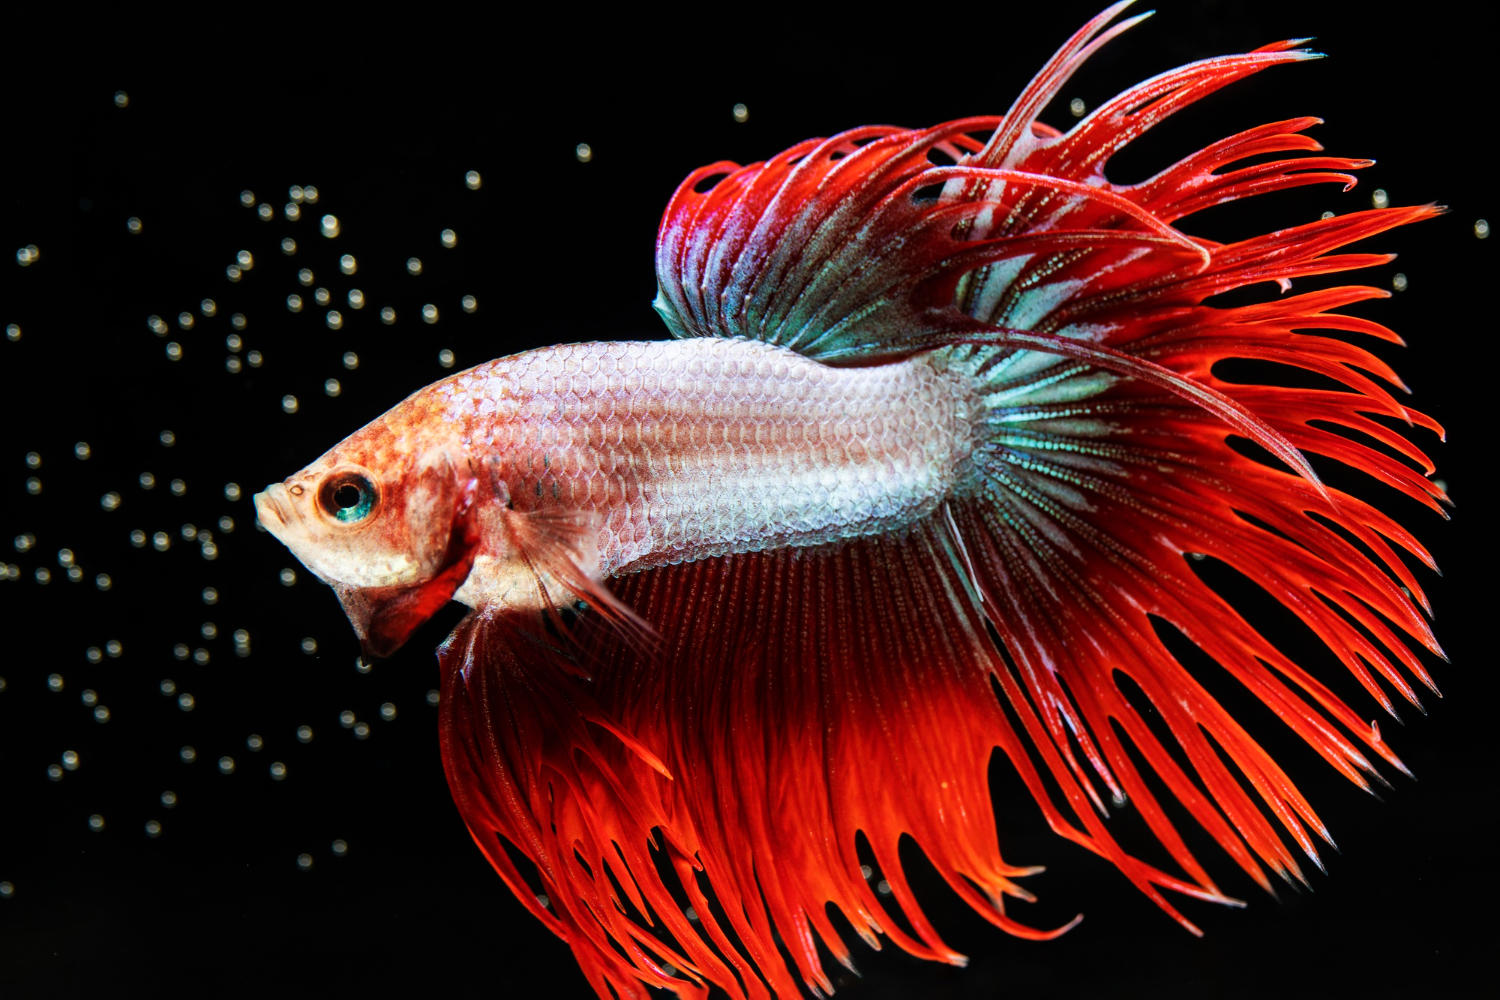 Safe and Effective Tips for Cleaning Your Fish Tank Without Harming Your Fish